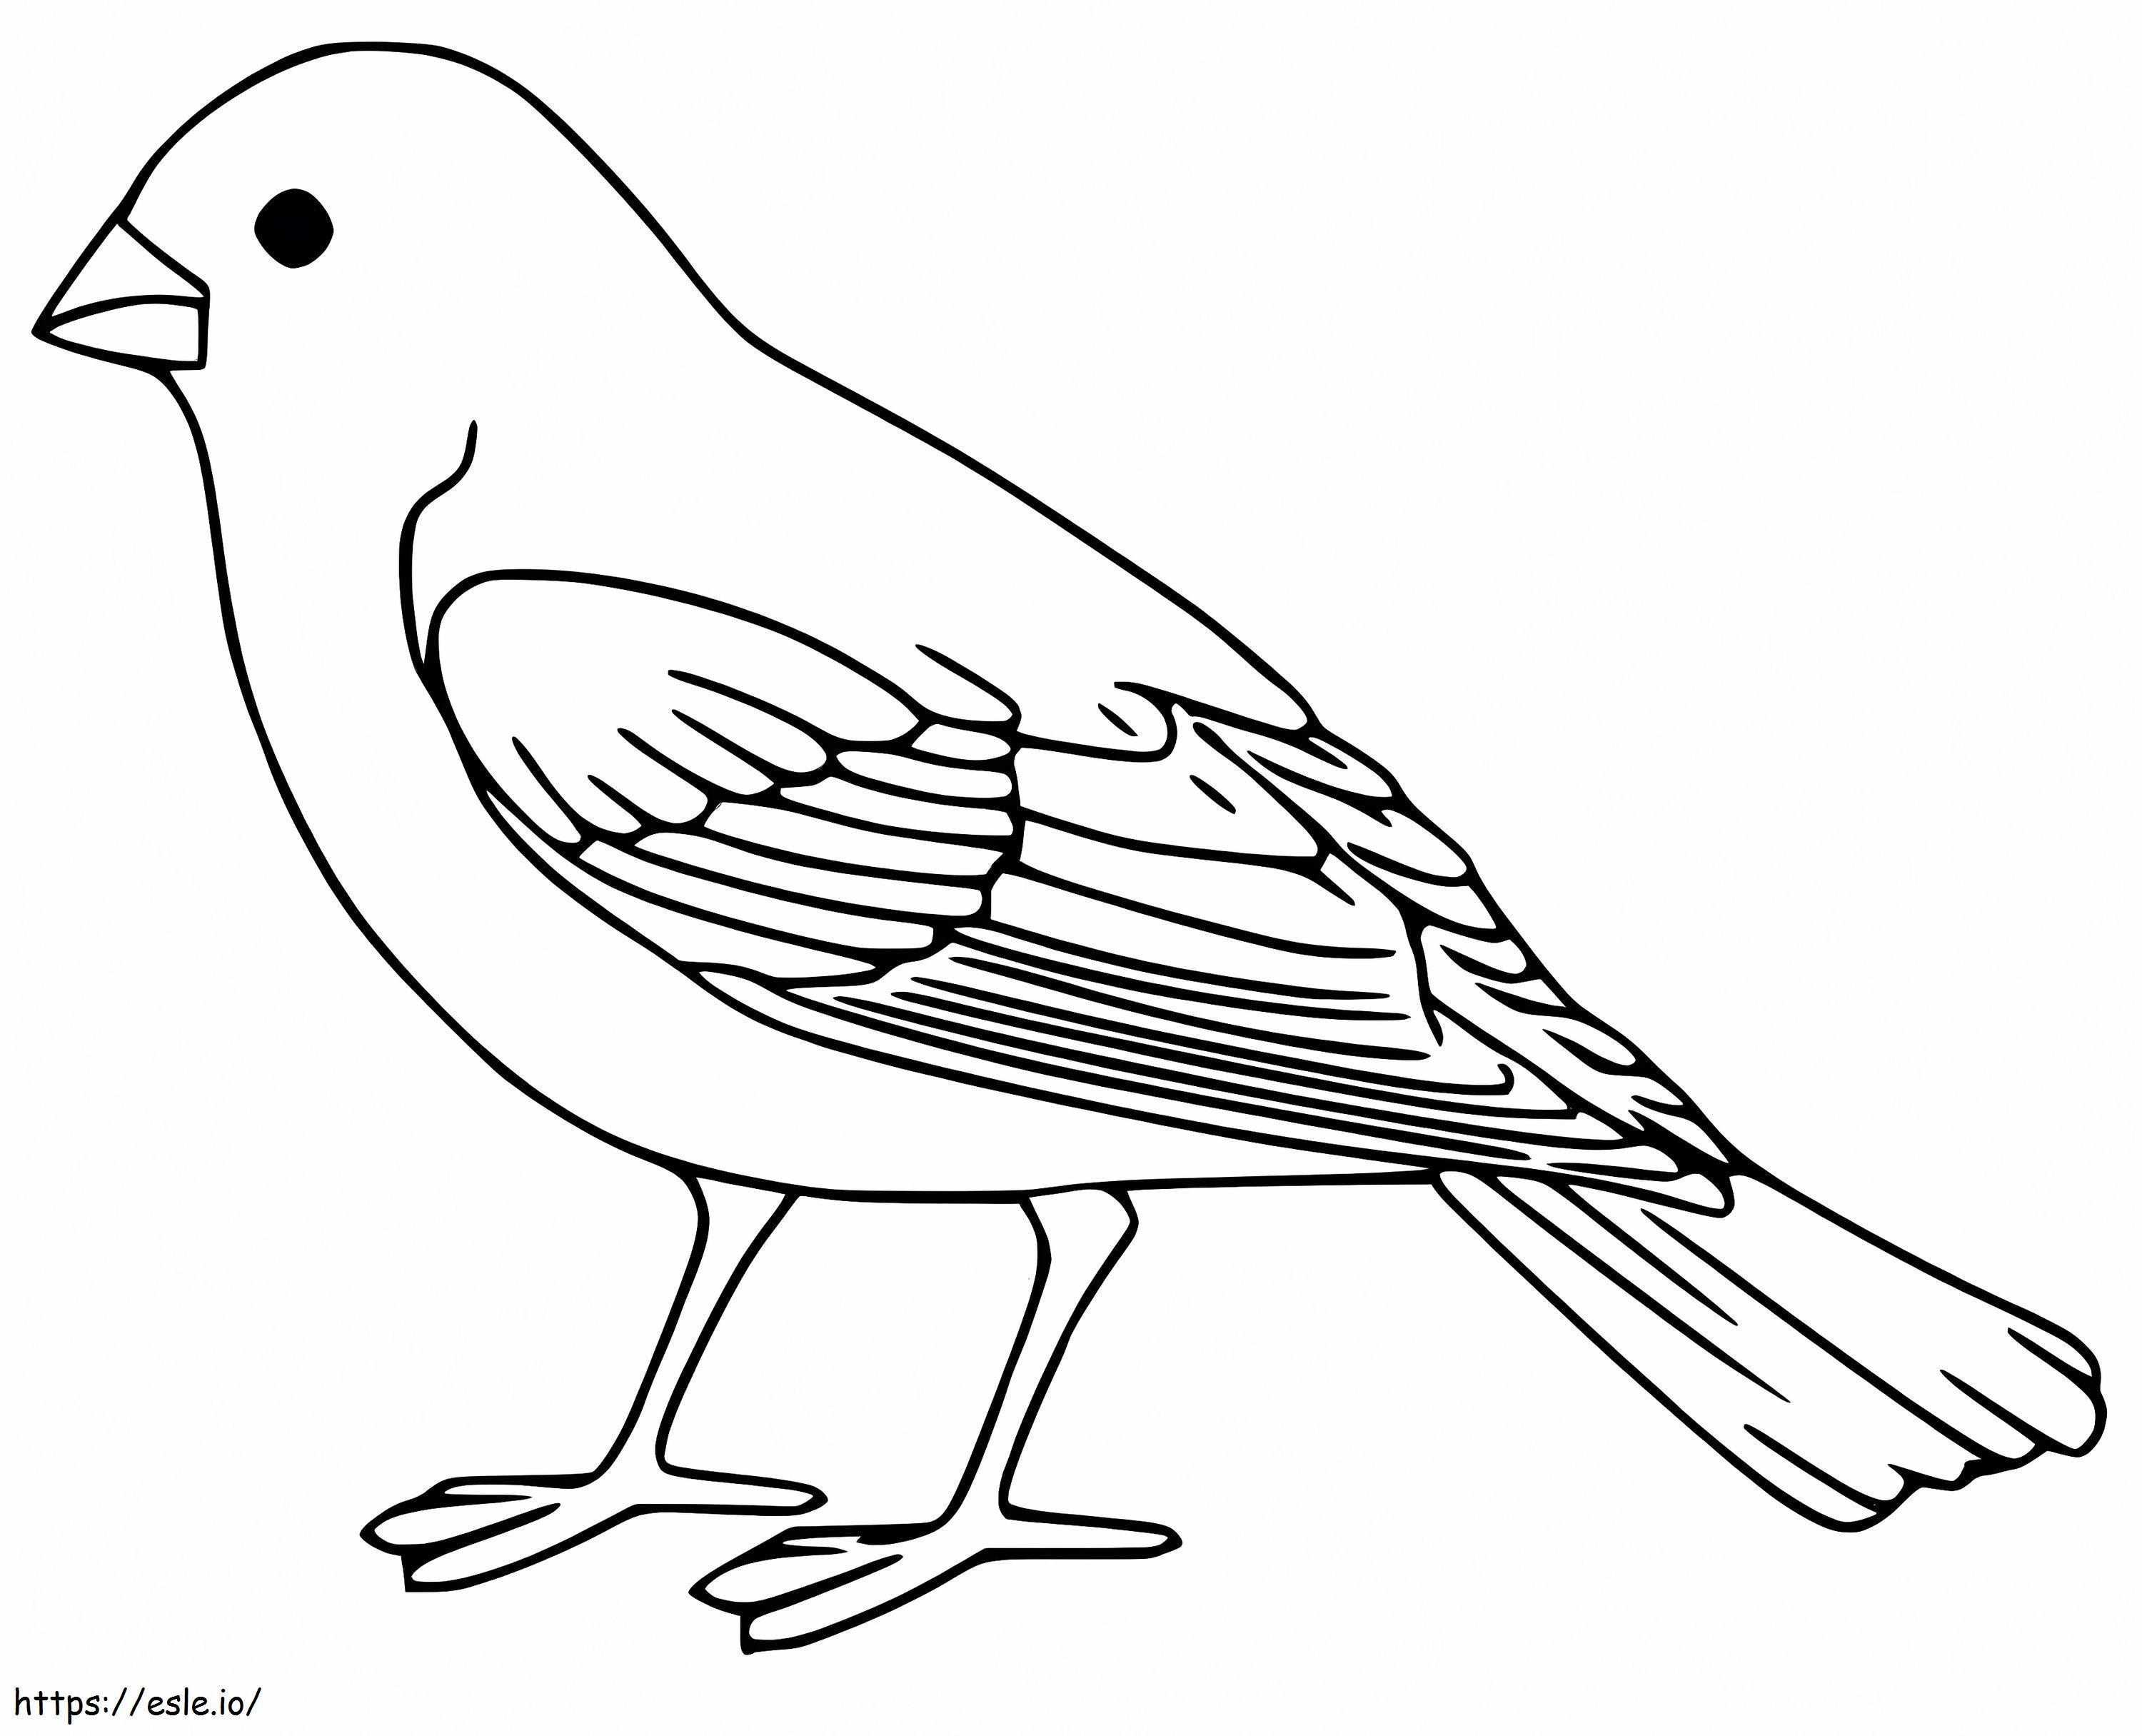 Standing Sparrow coloring page